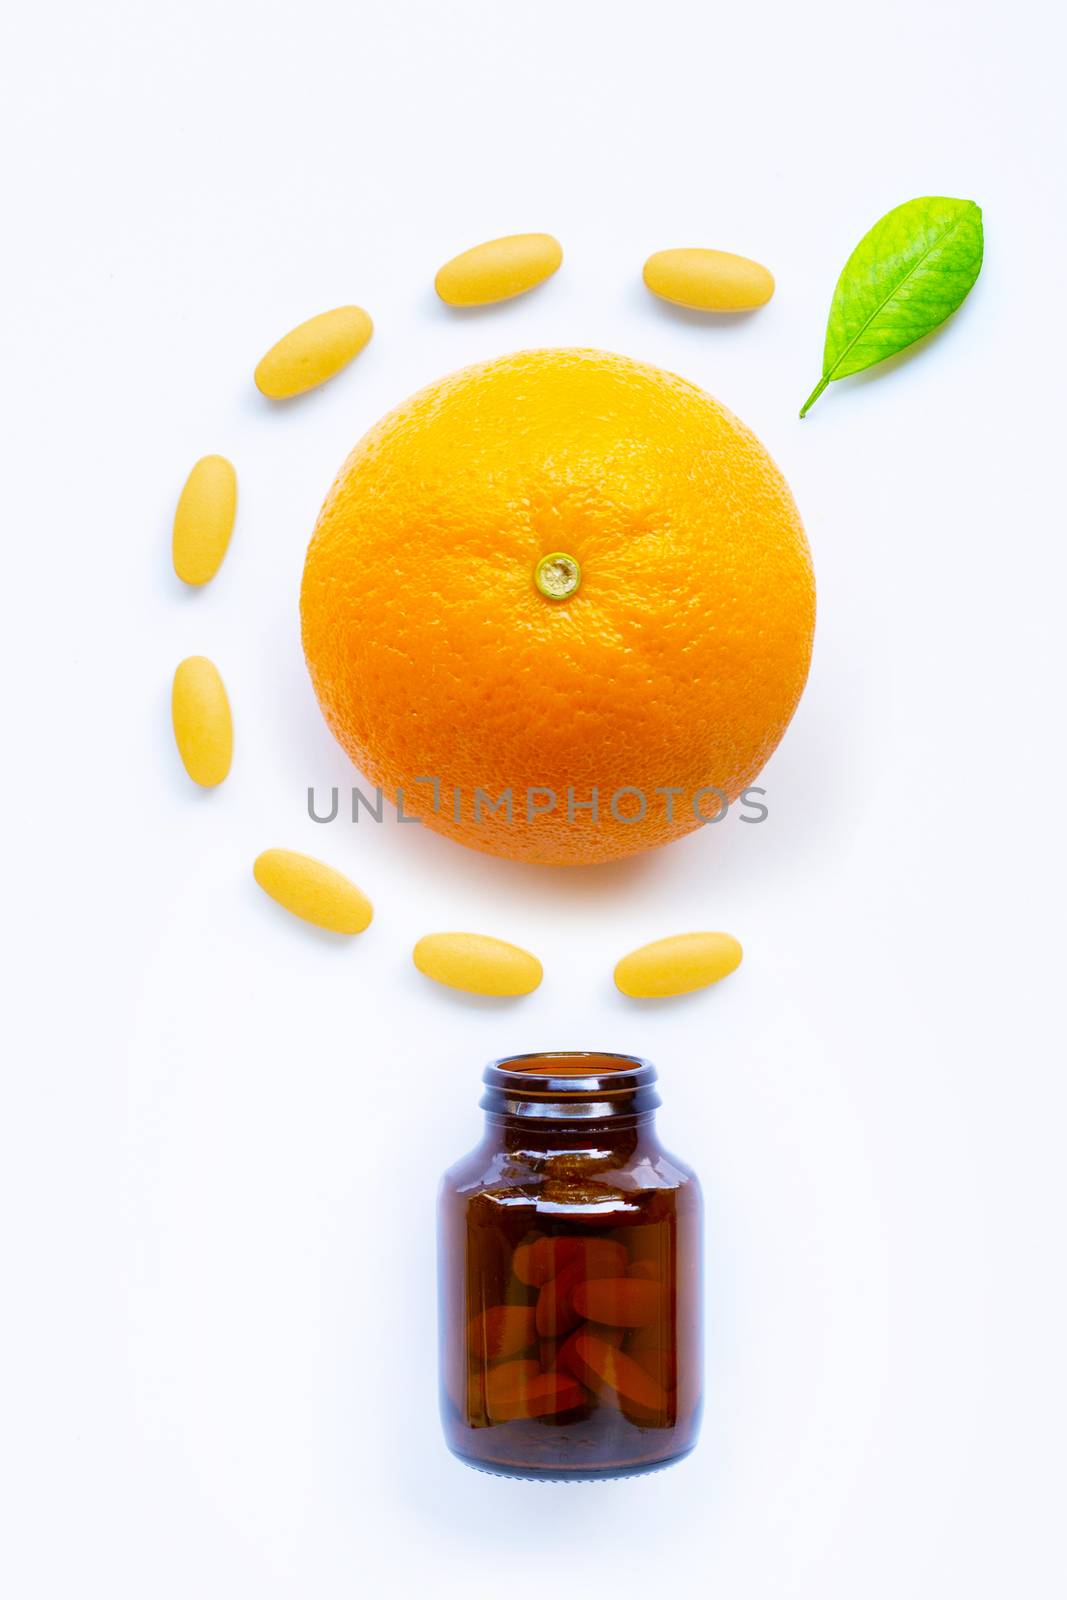 Vitamin C bottle and pills with orange fruit on white  by Bowonpat